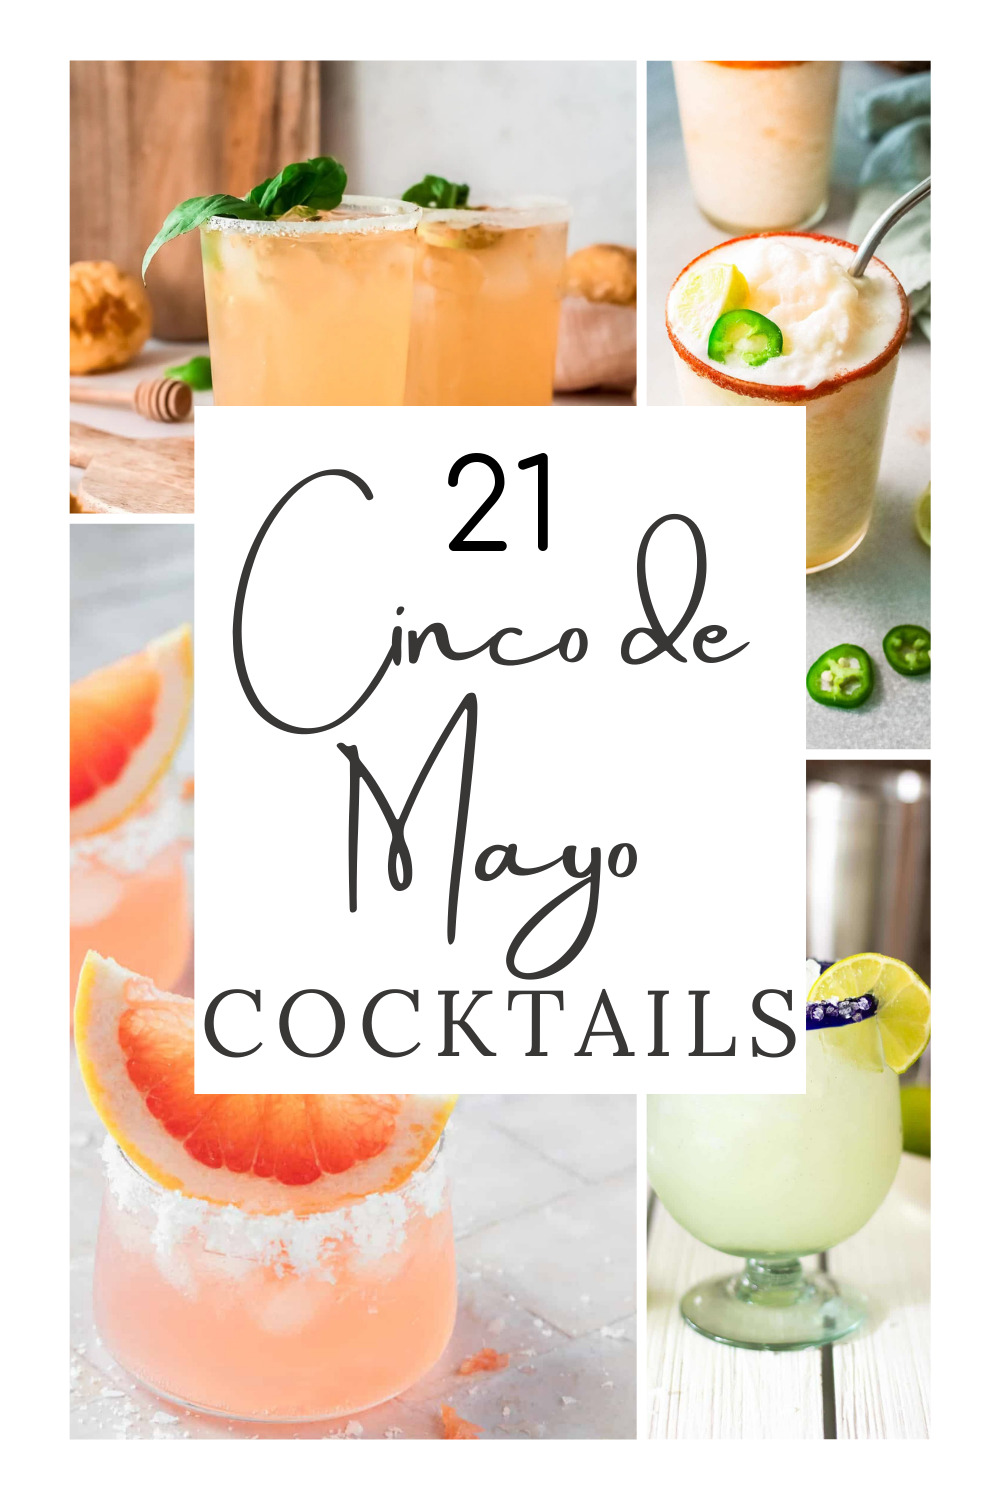 A college of Cinco de Mayo drinks and cocktails to celebrate the holiday!